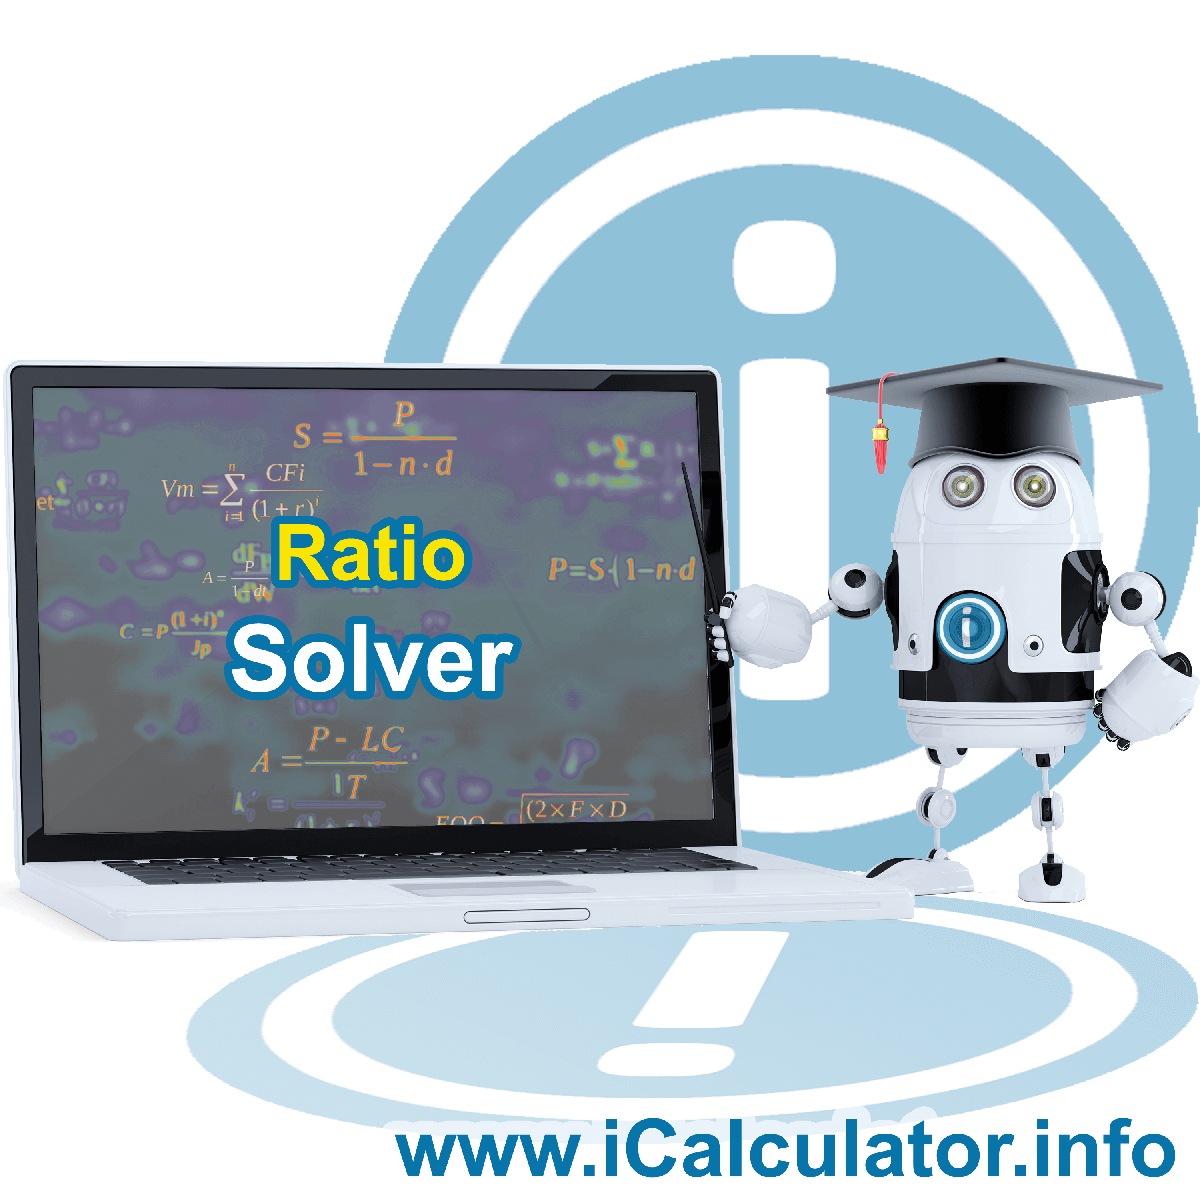 Ratio Solver. This image shows the properties and ratio solver formula for the Ratio Solver